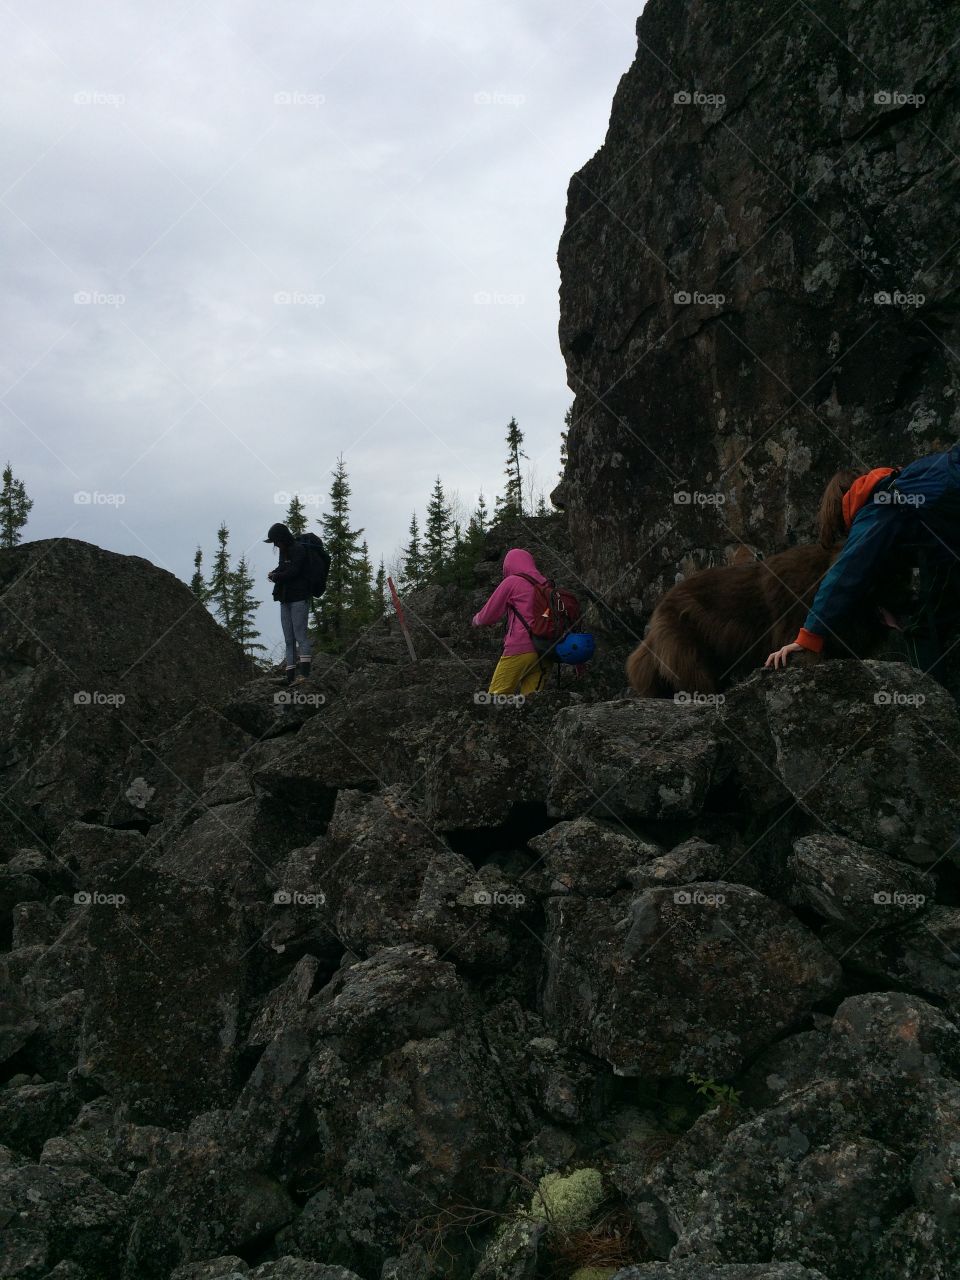 Hiking the talus field at Claghorn, Thunder Bay